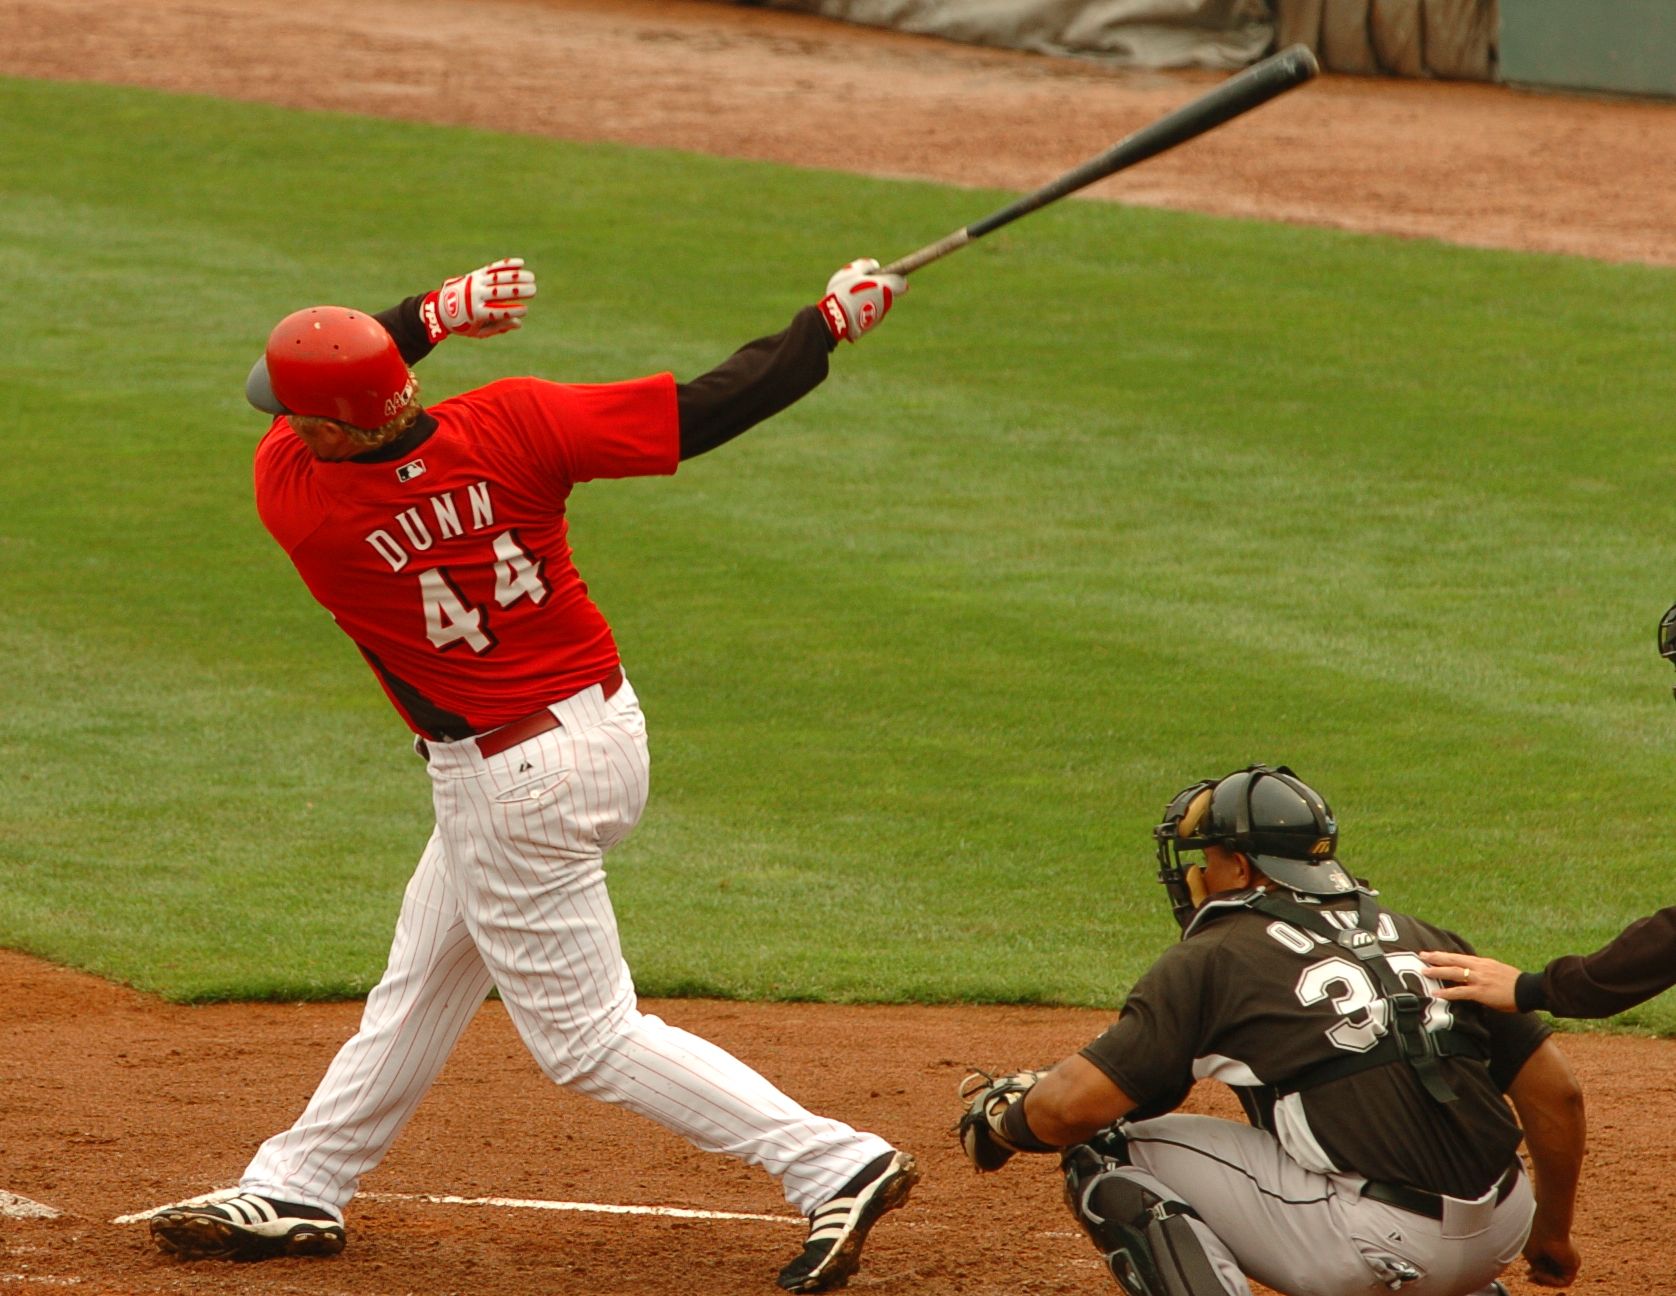 Dayton Dragons on X: March 31, 2007 - The Cincinnati Reds and Florida  Marlins met in an exhibition game at Day Air Ballpark. The Reds lineup  featured future Hall-of-Famer Ken Griffey Jr.